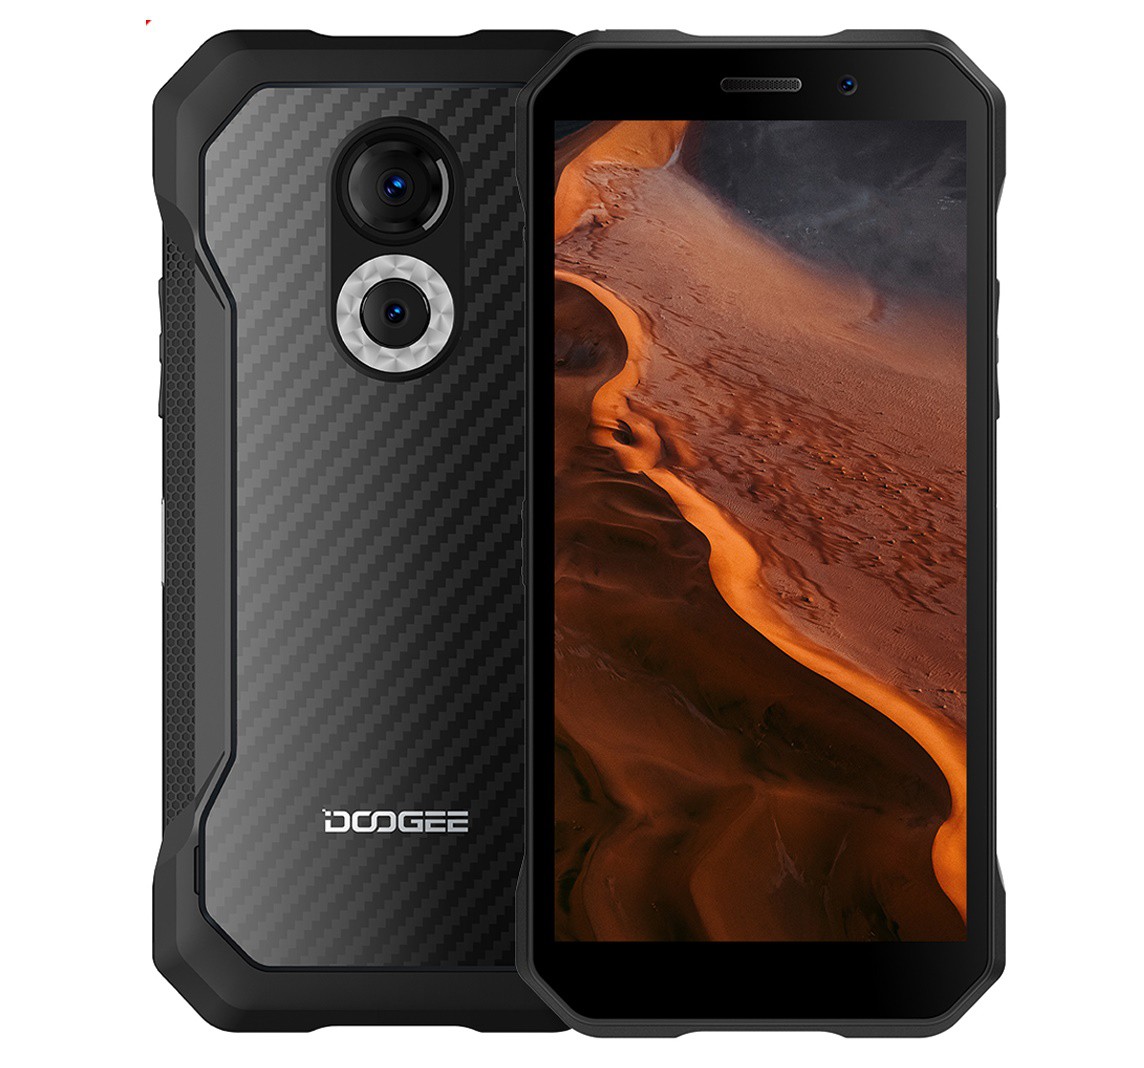 Doogee S61 full specifications features and price